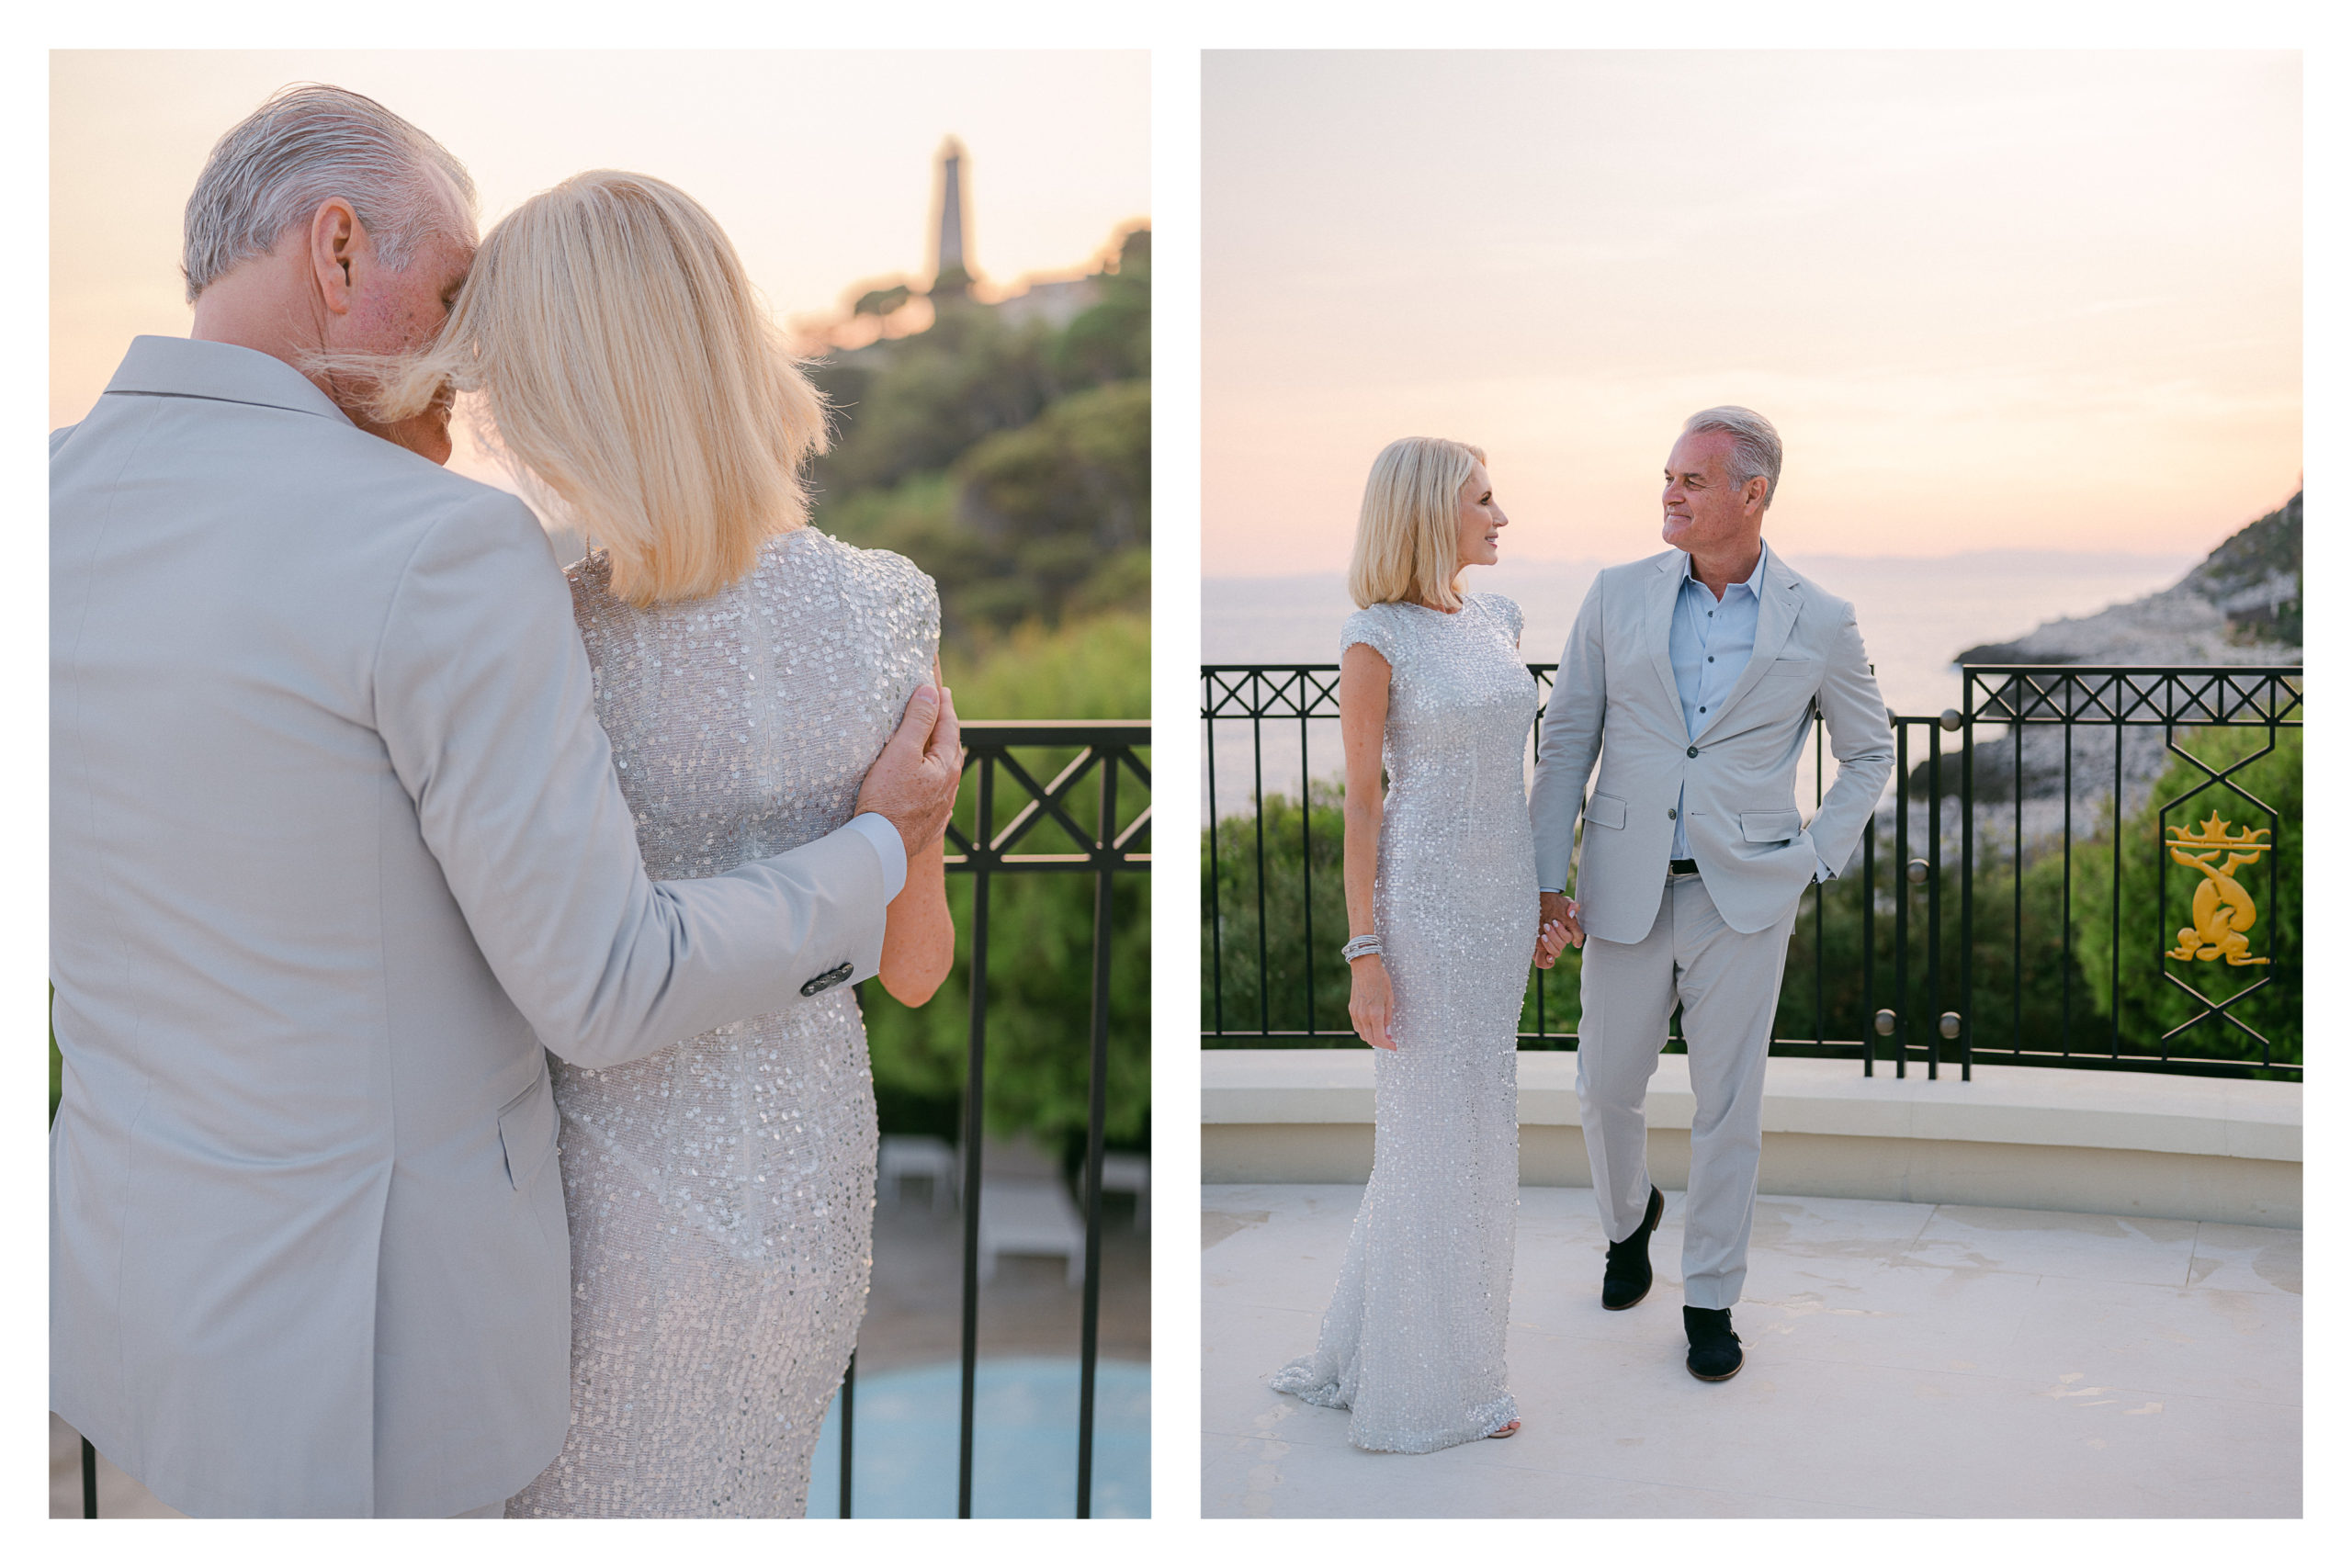 wedding photographer french riviera south of france